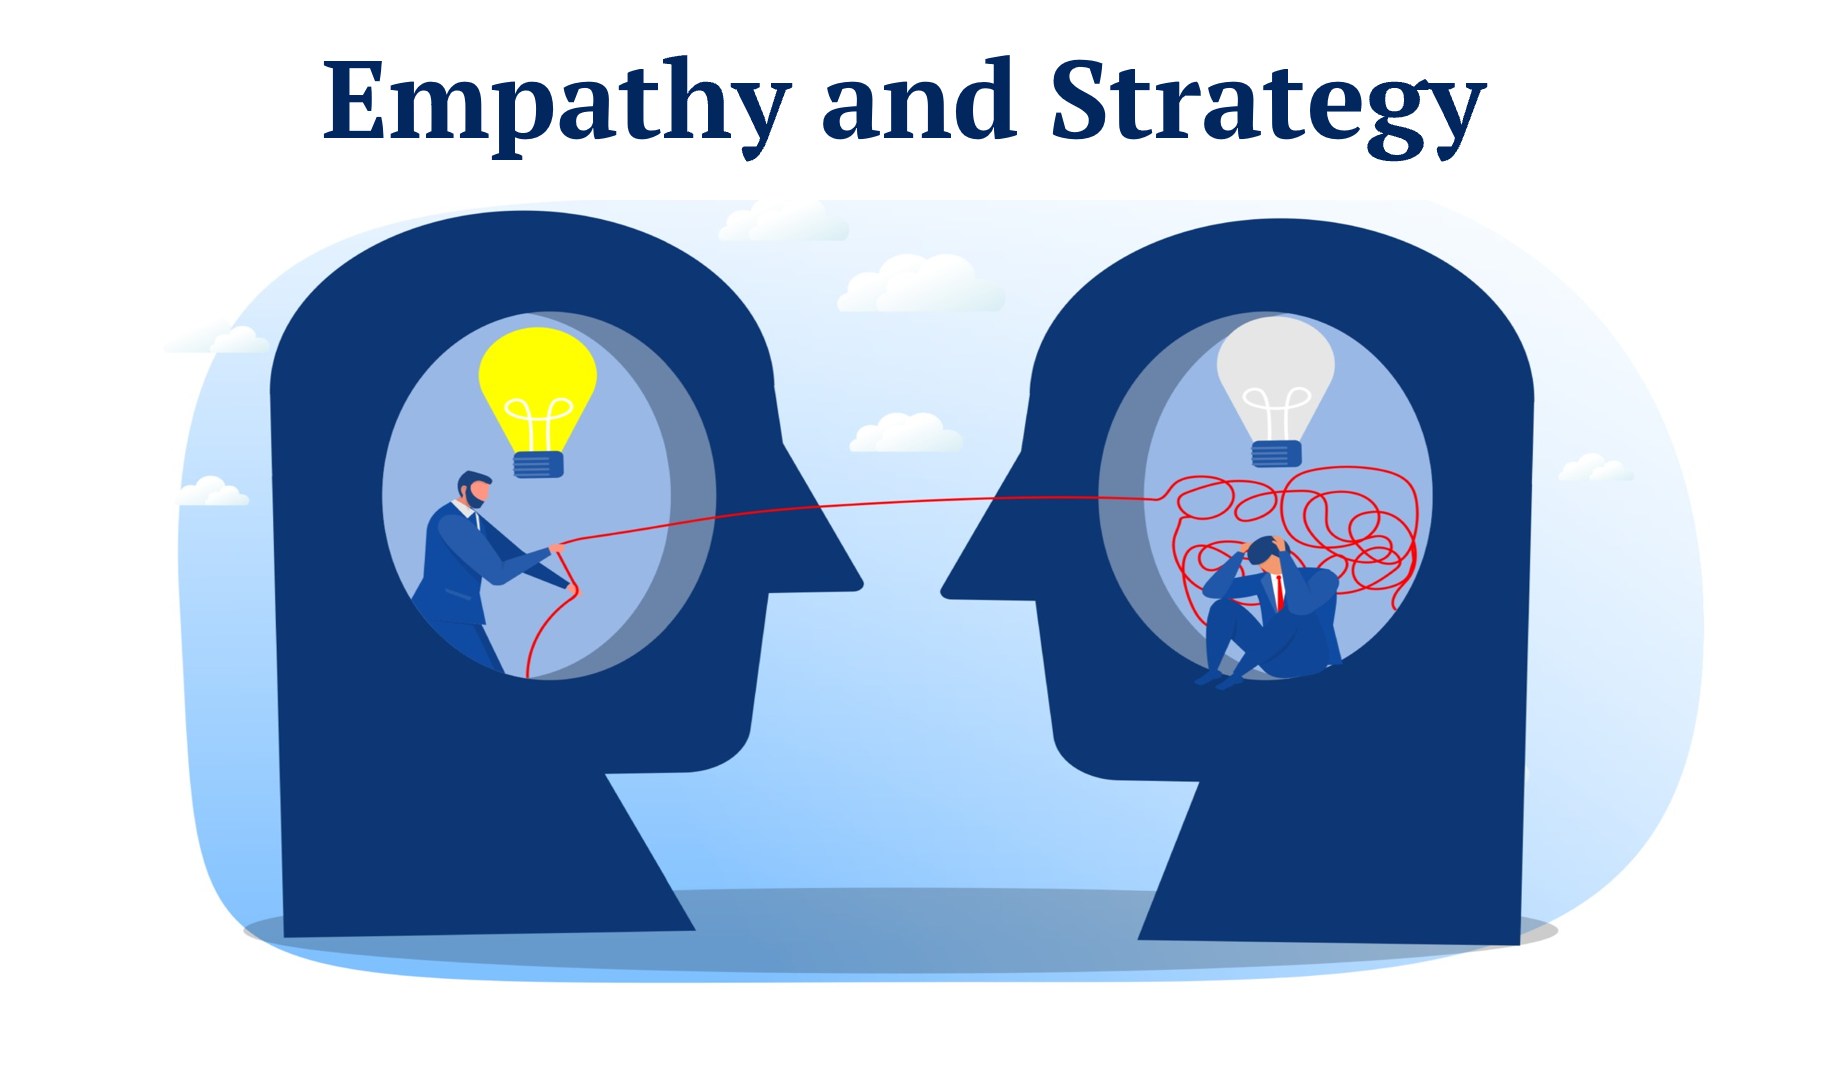 Empathy and Strategy